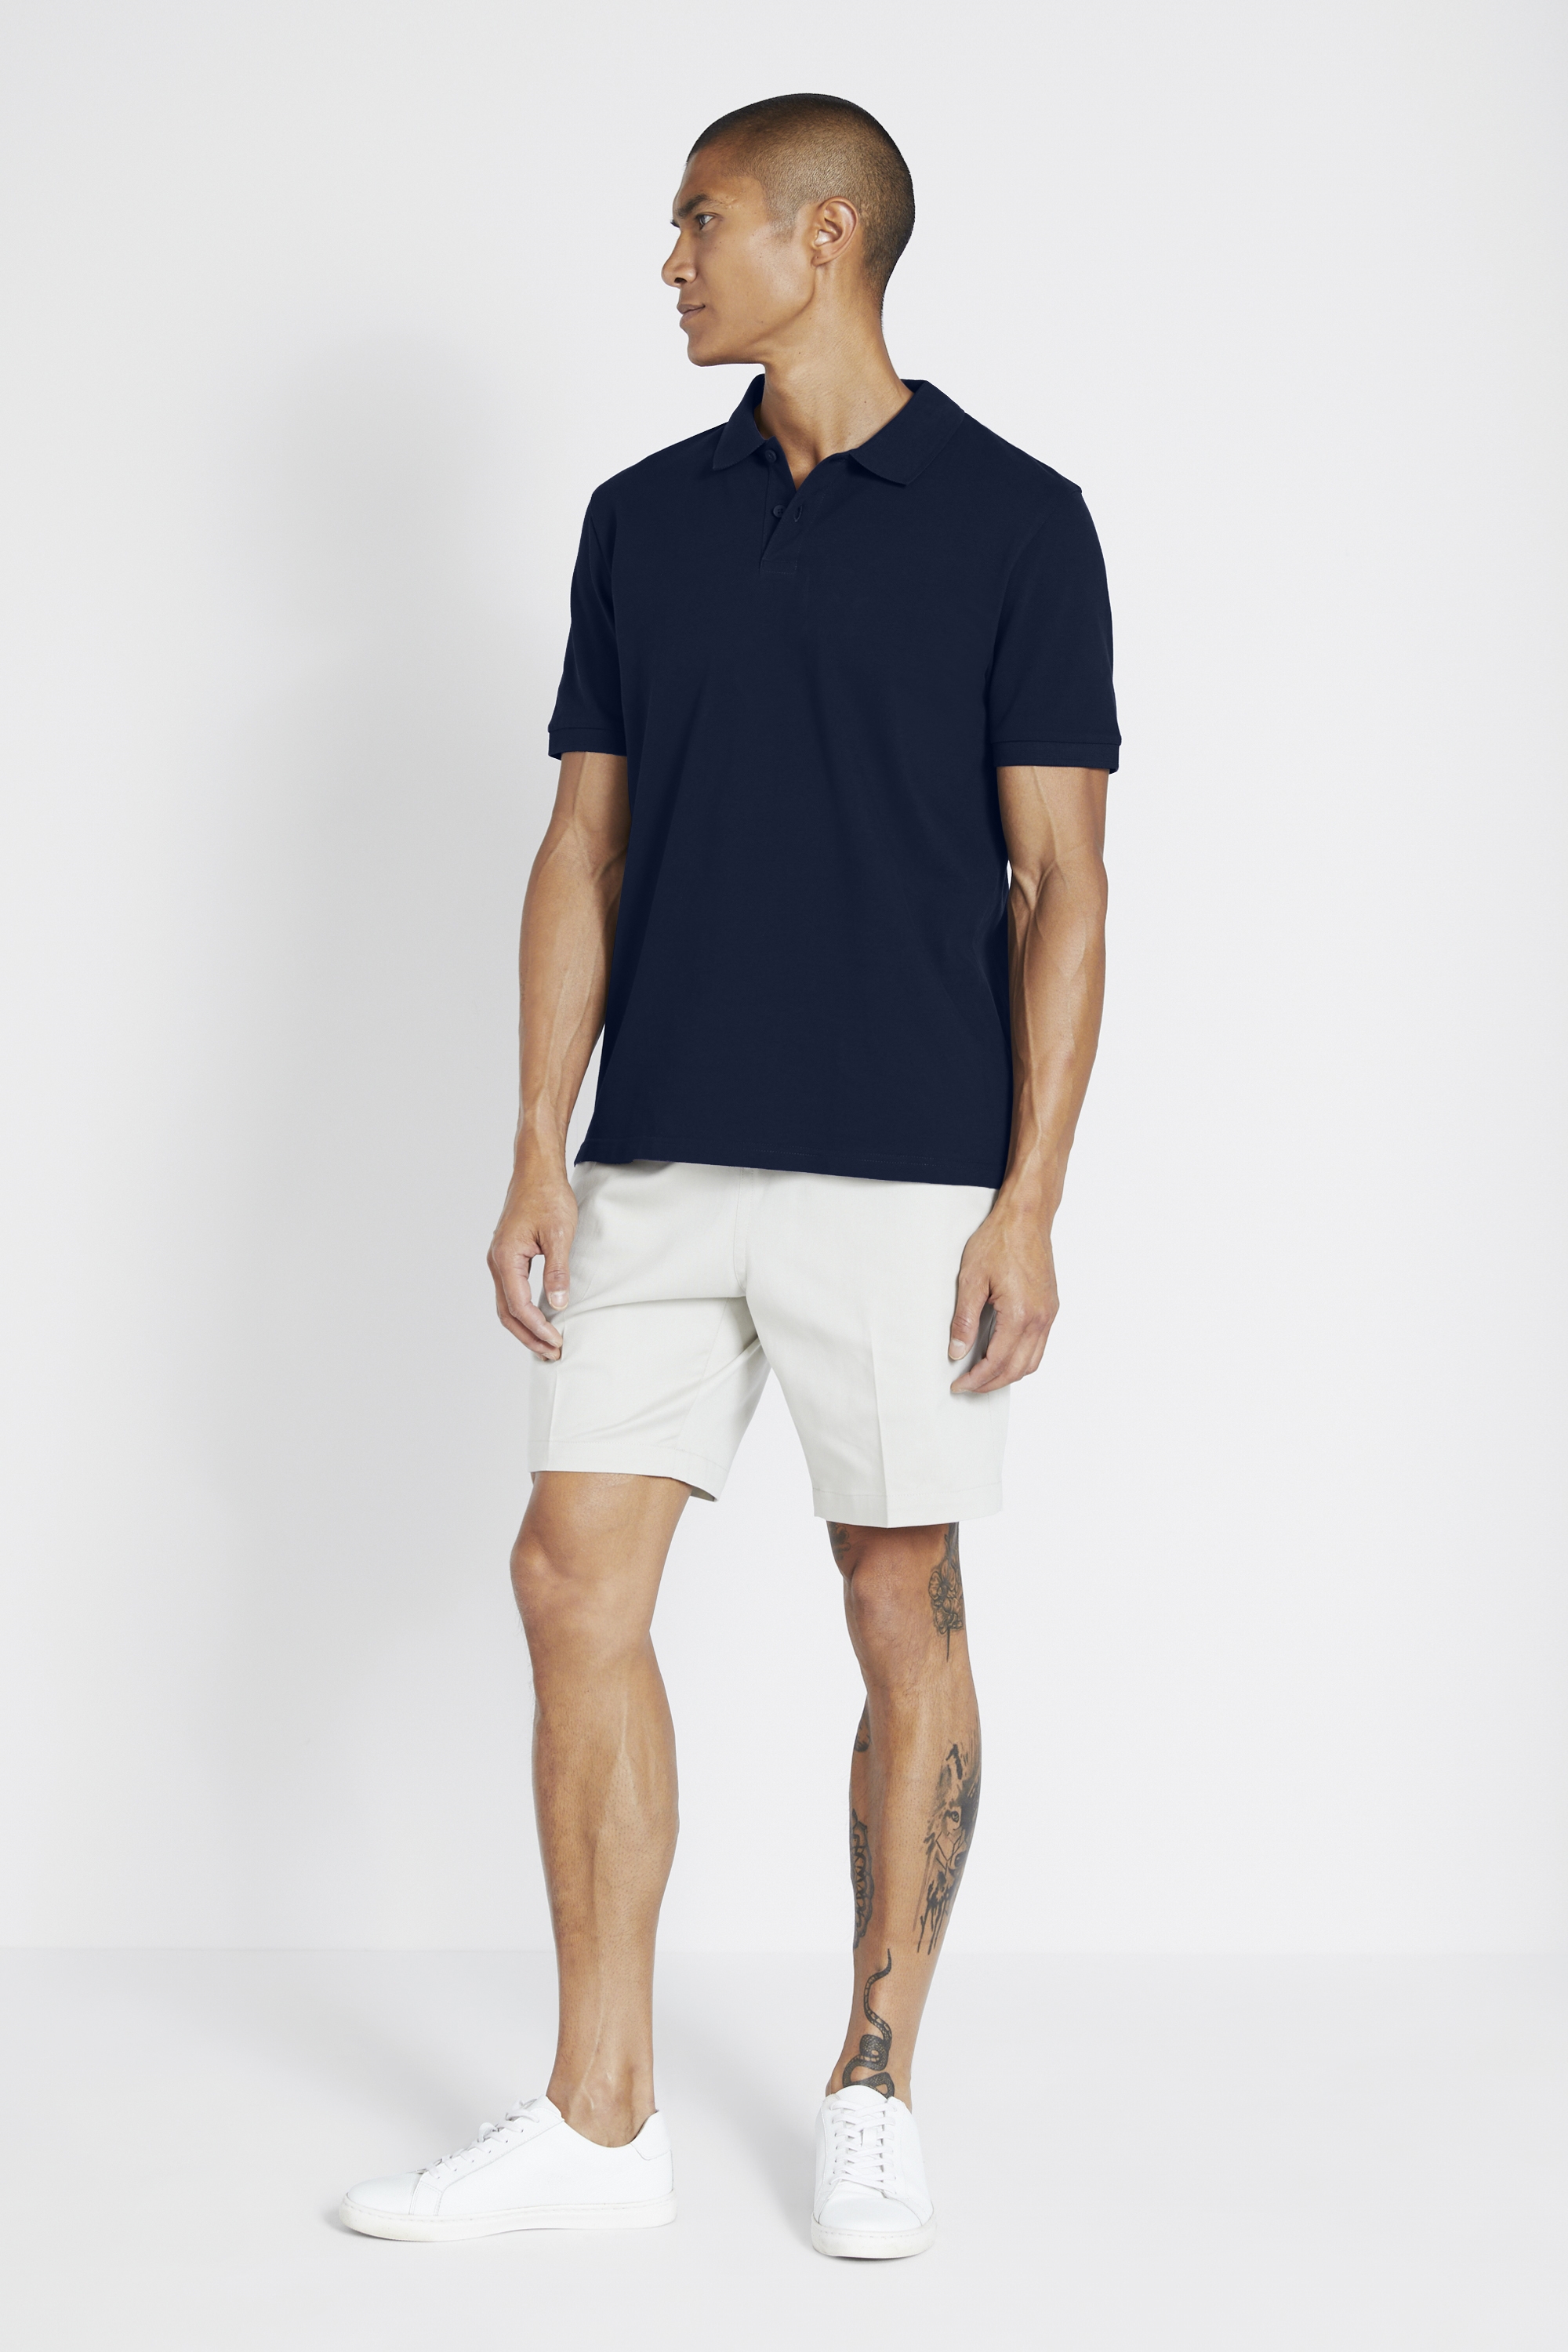 Navy Pique Polo Shirt | Buy Online at Moss